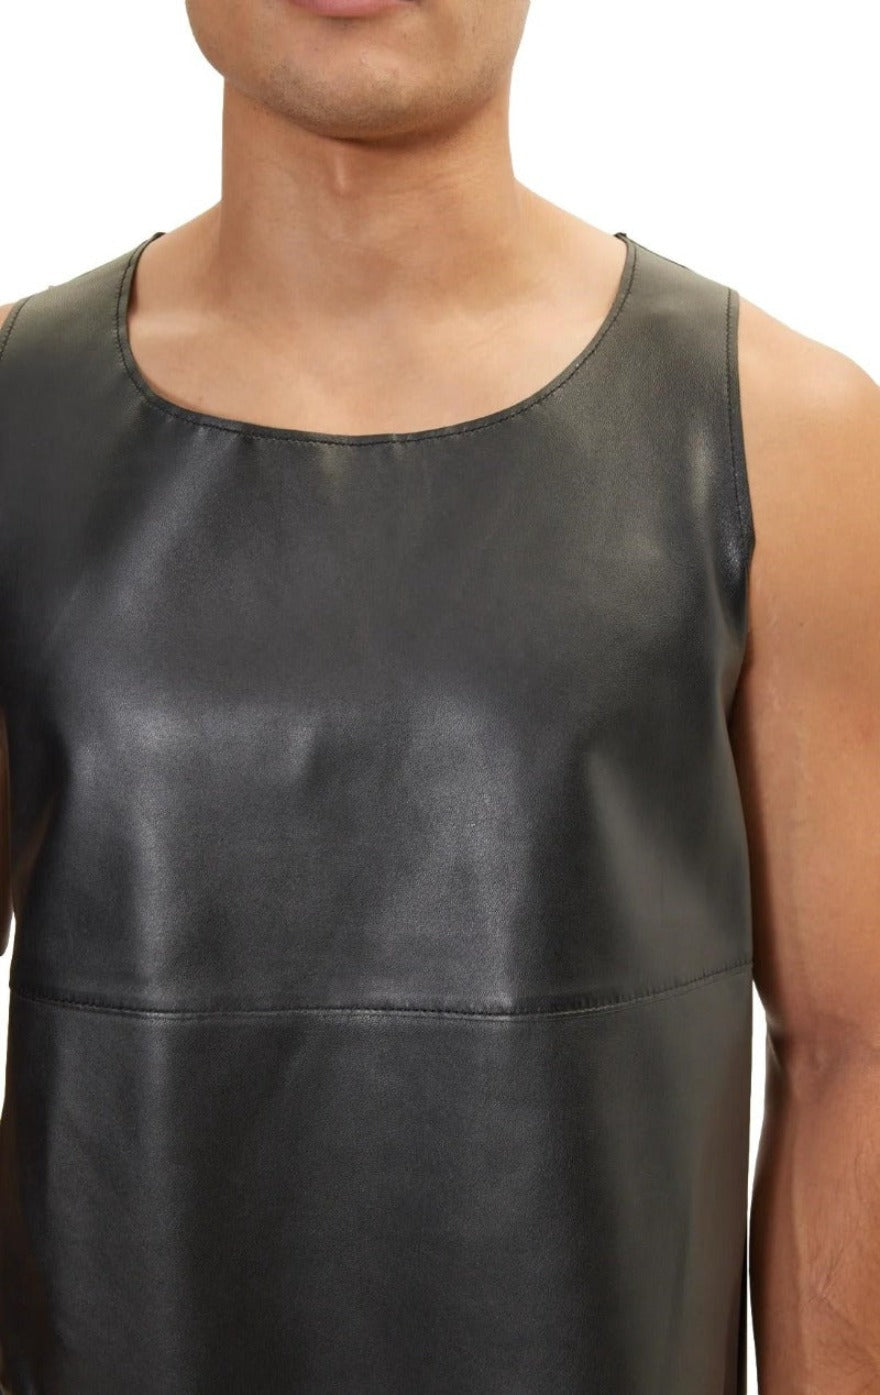 Elevate Your Style with Premium Black Leather Tank ChersDelights Apparel